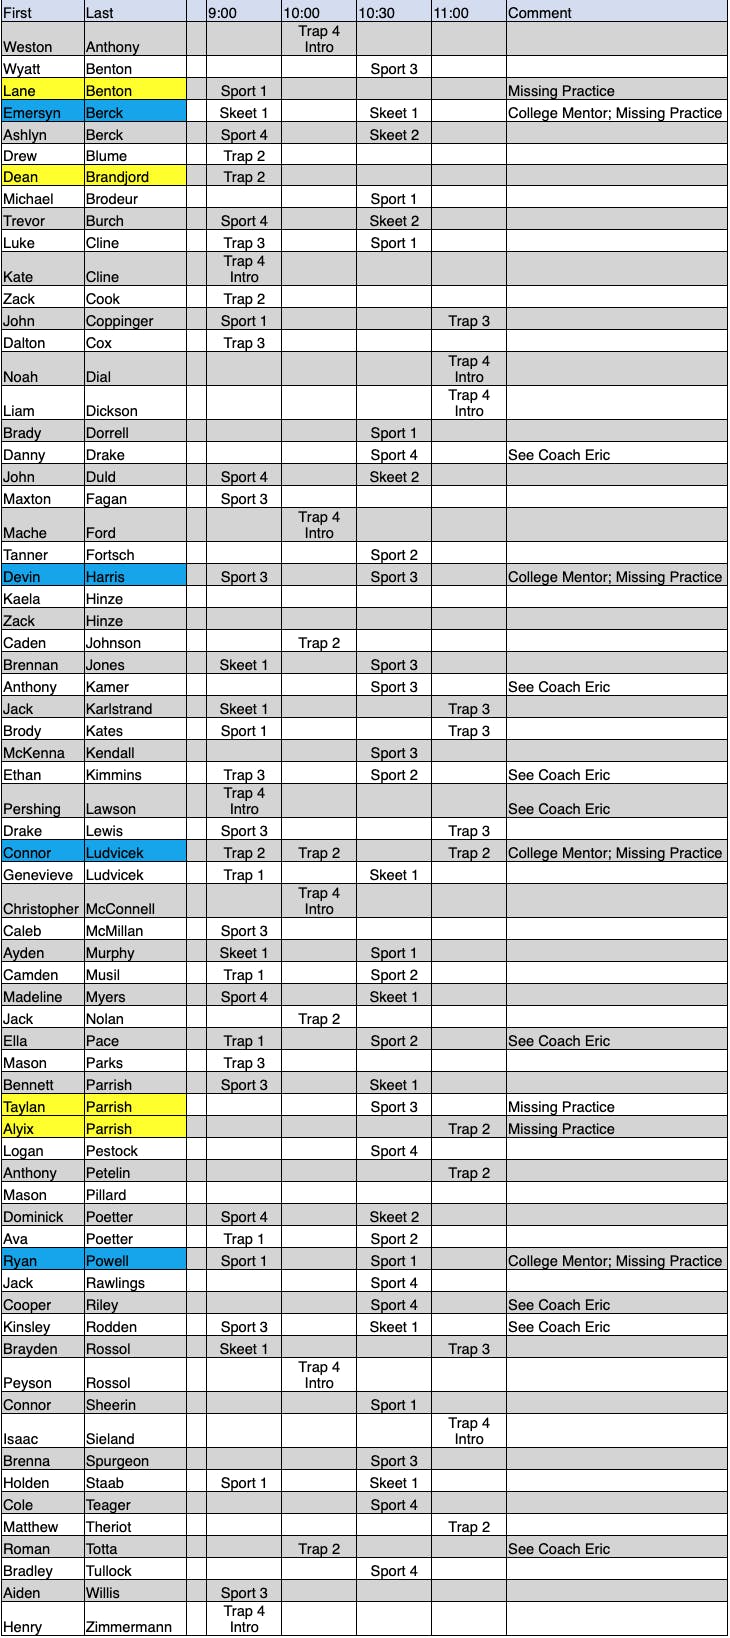 Sign-in sheet for the April 20th practice